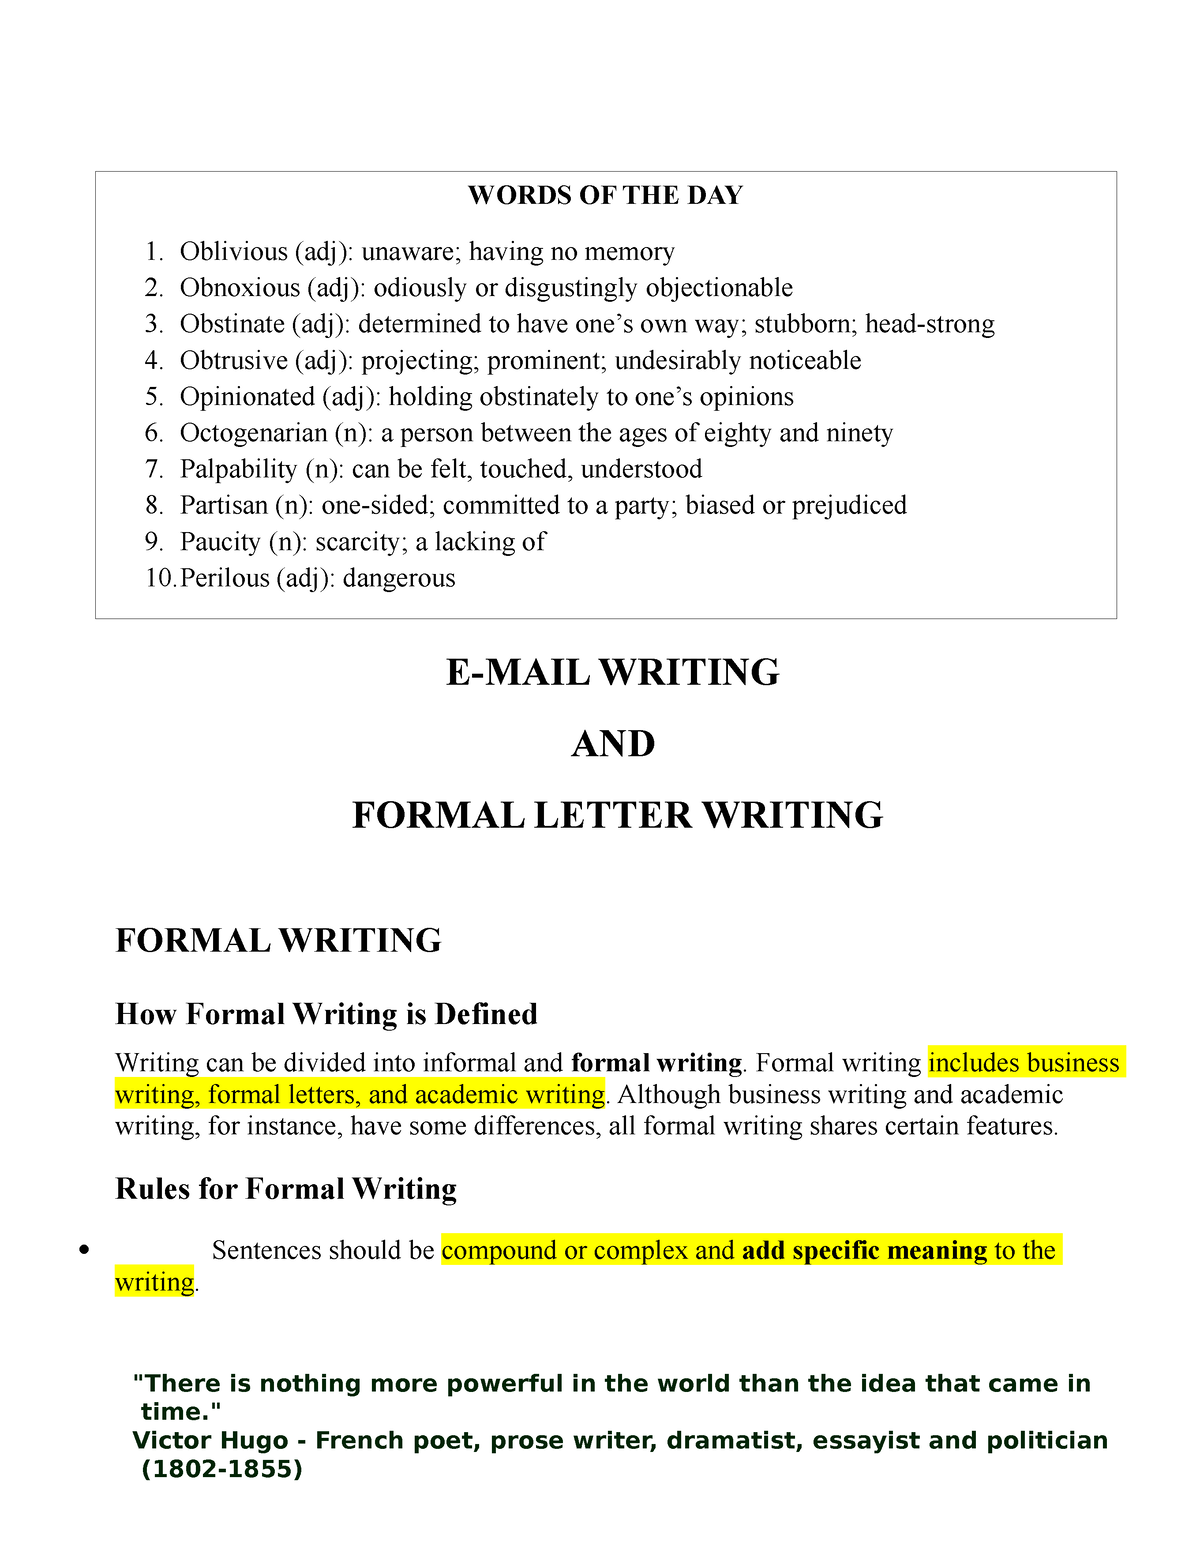 formal writing meaning